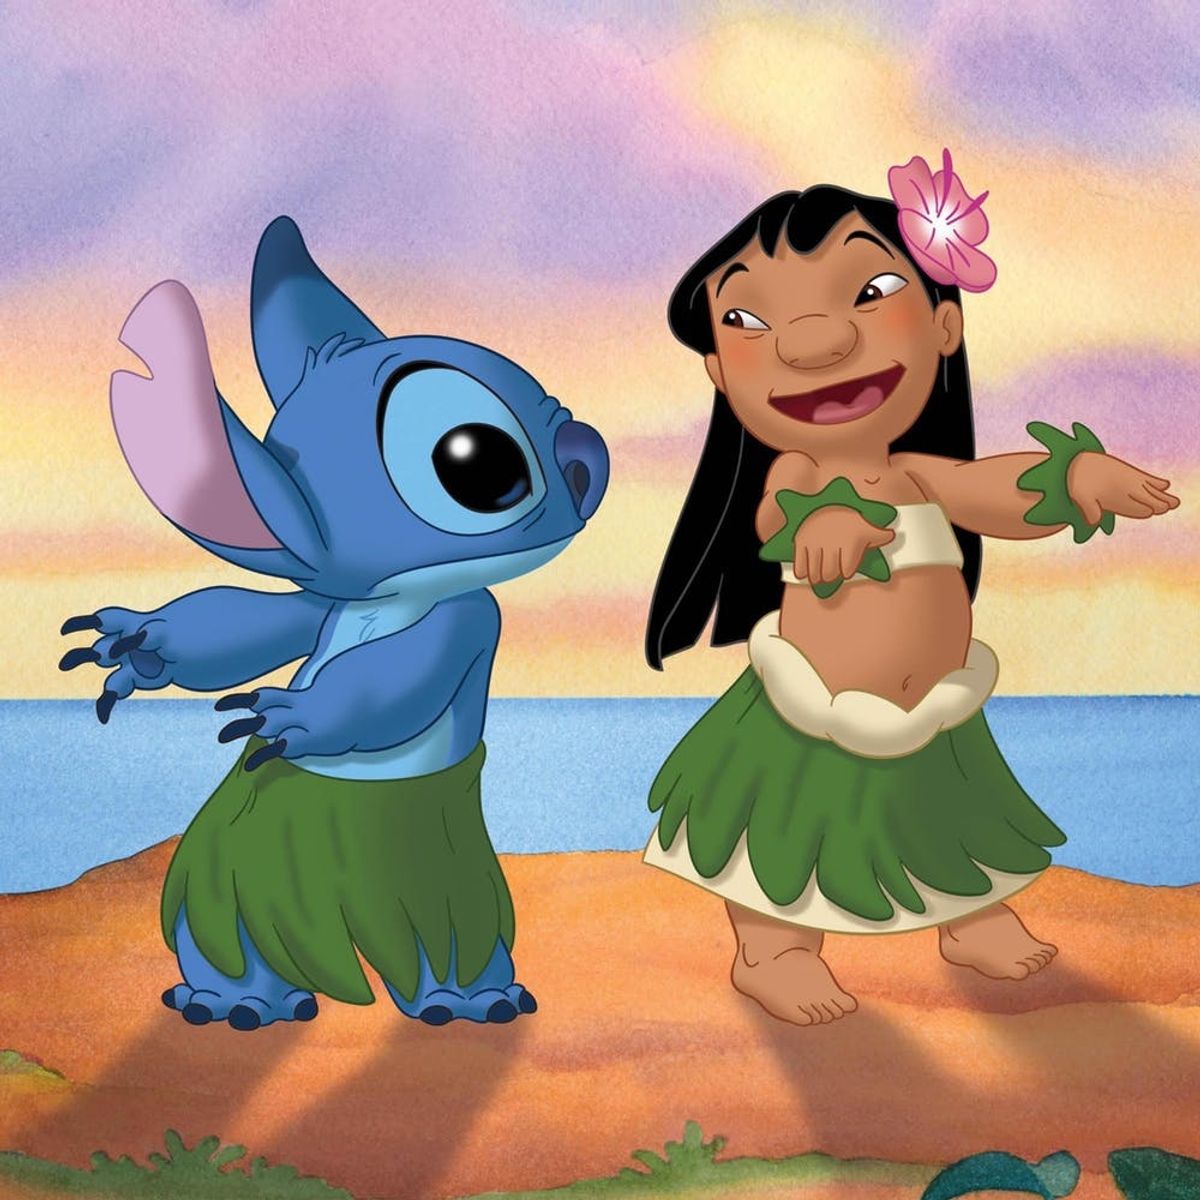 Disney’s ‘Lilo and Stitch’ Is Getting a Live-Action Remake